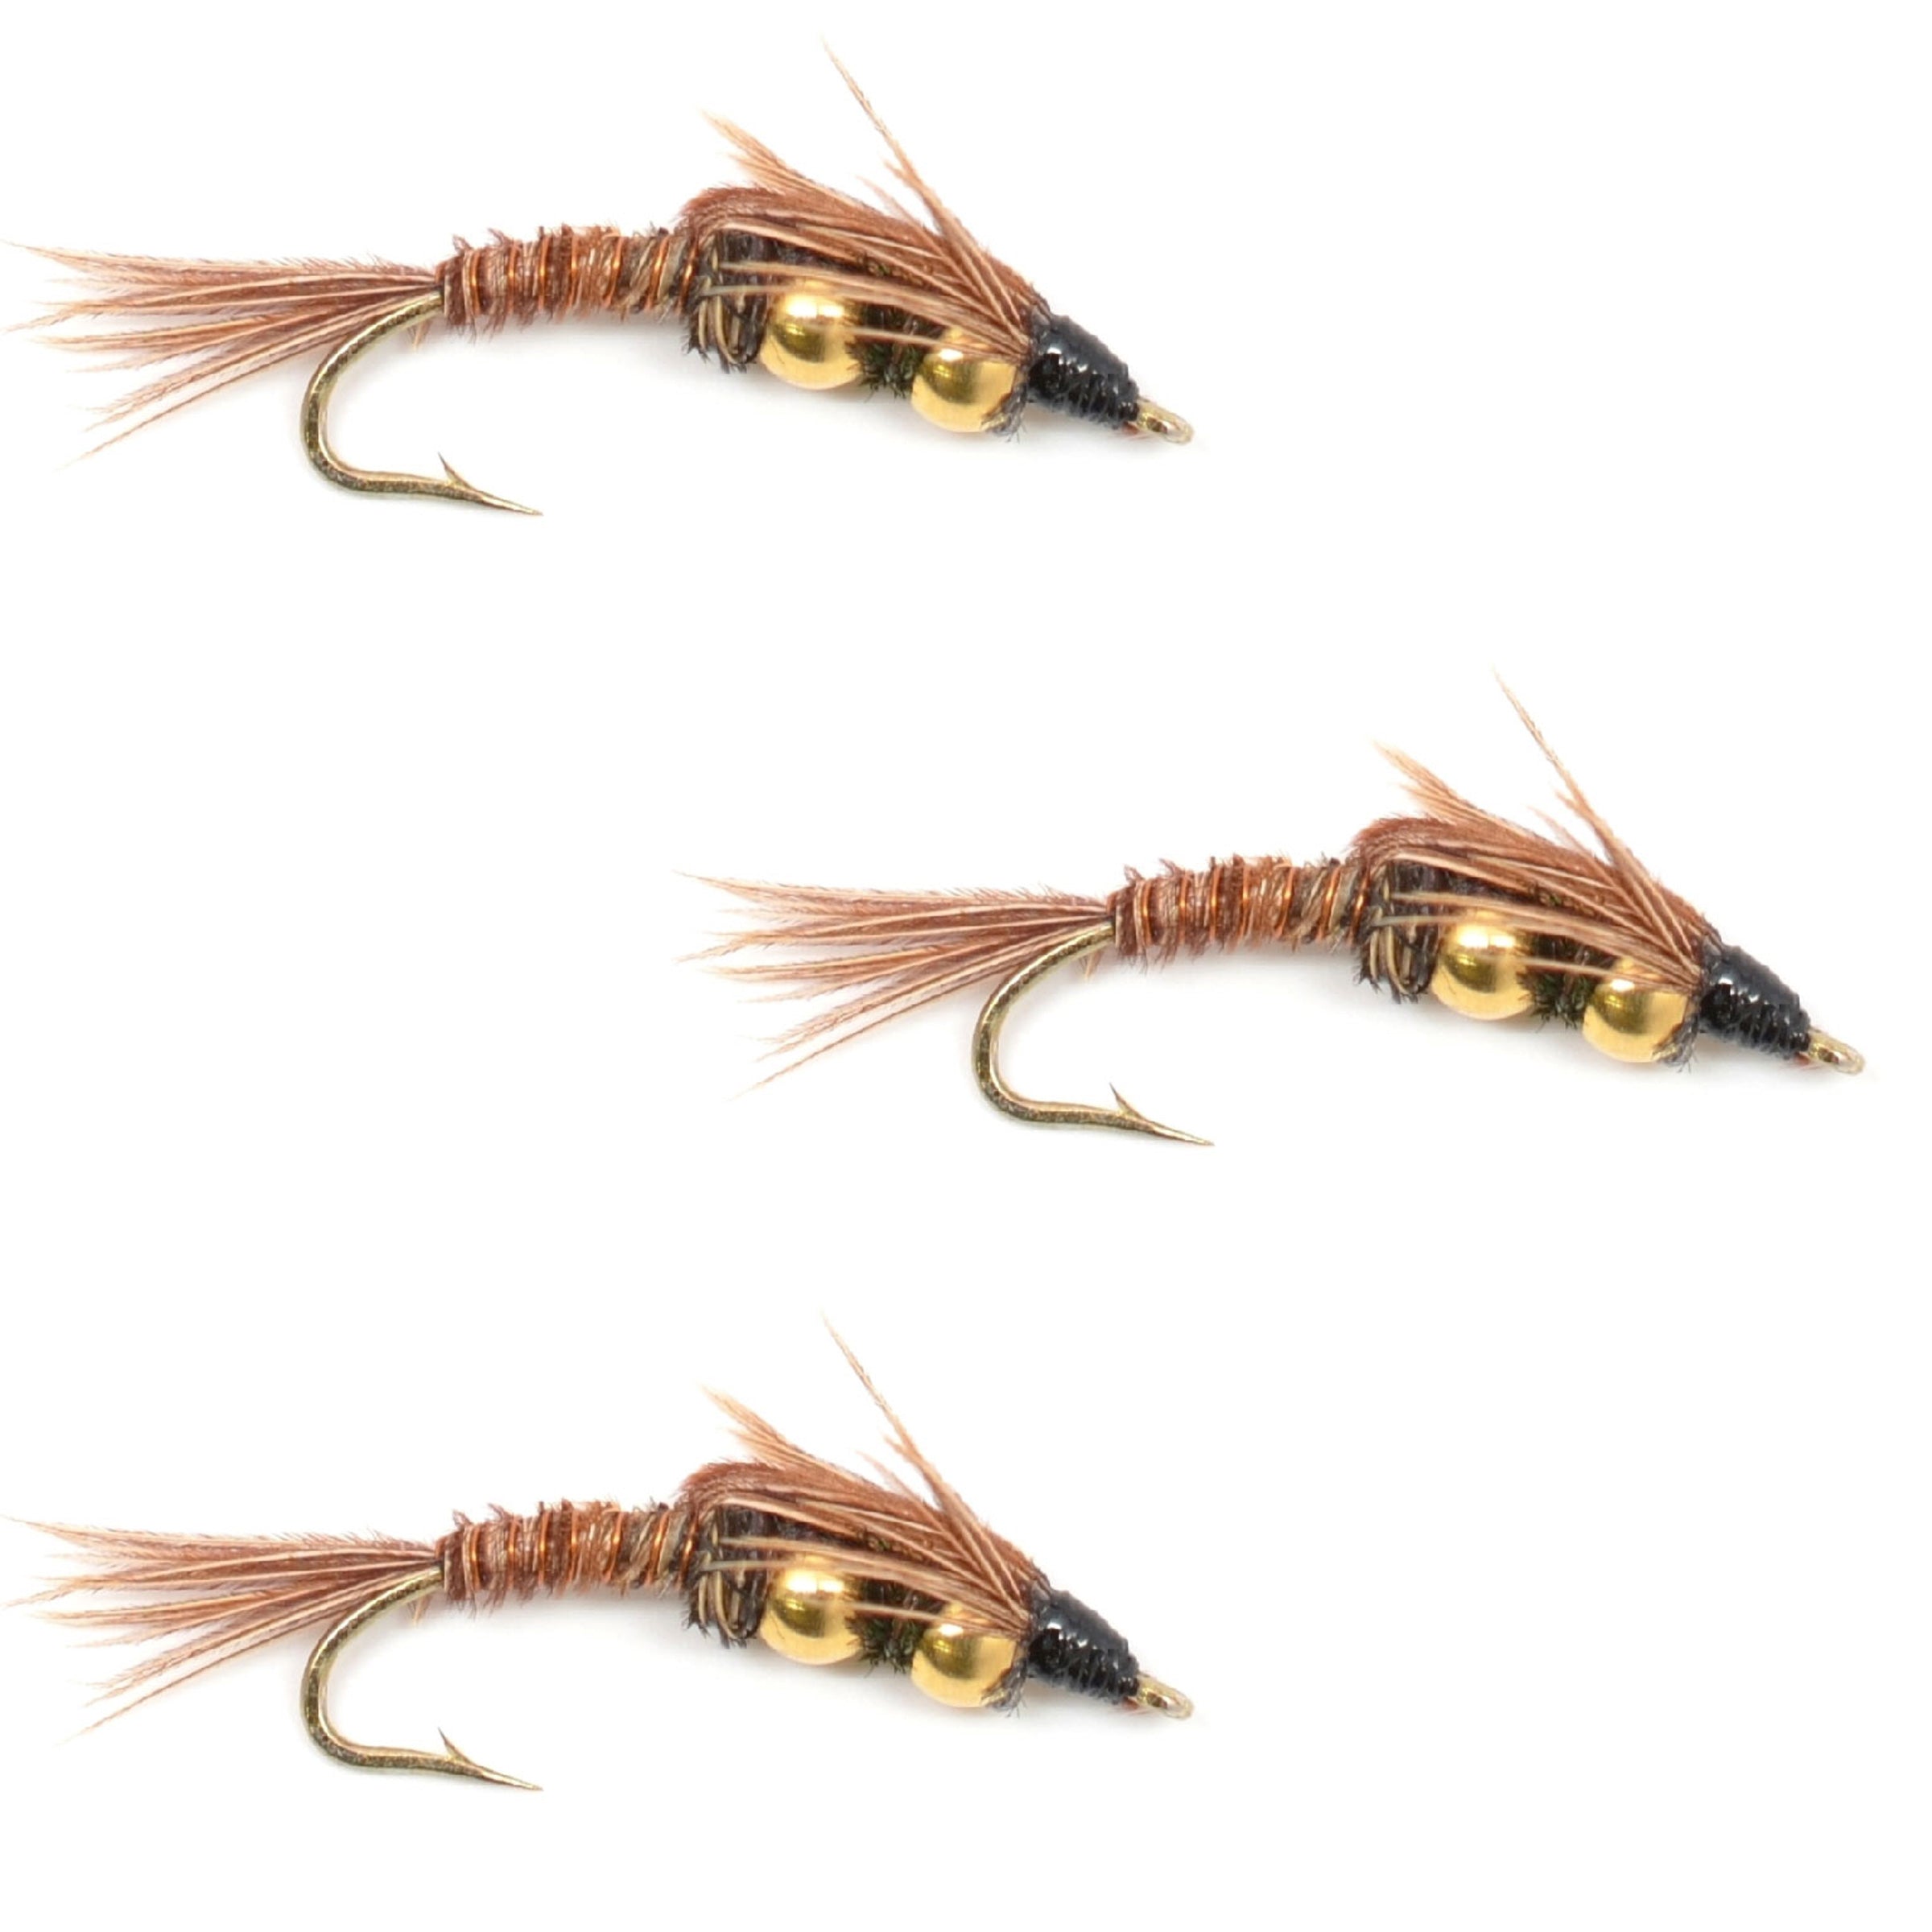 3 Pack Double Bead Pheasant Tail Nymph Fly Fishing Flies Hook Size 12